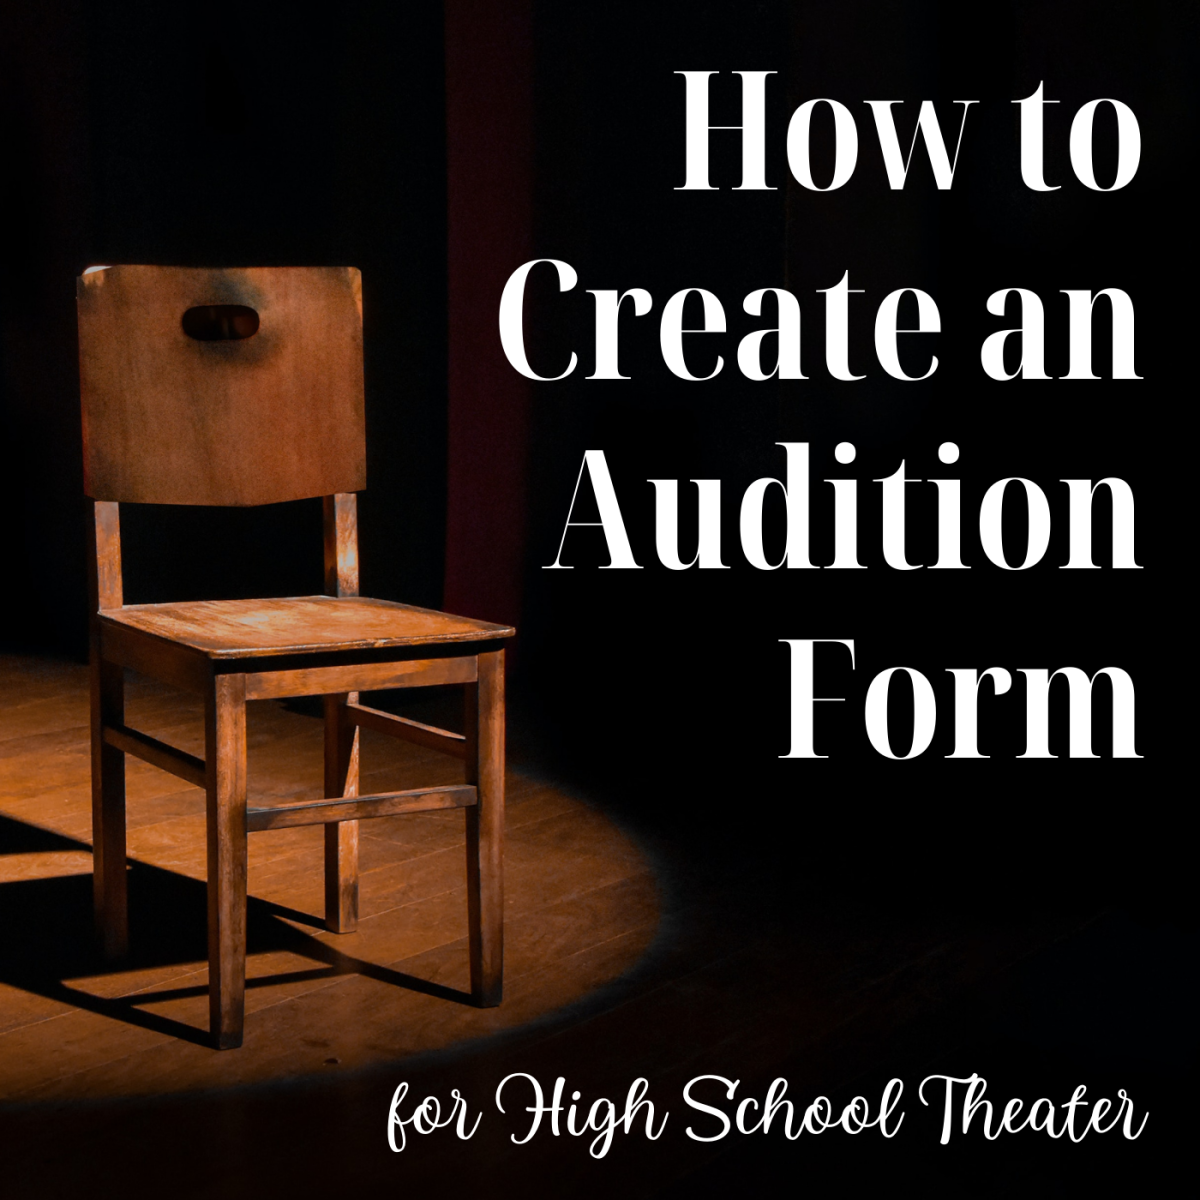 What to Include in the Audition Form for a High School Play